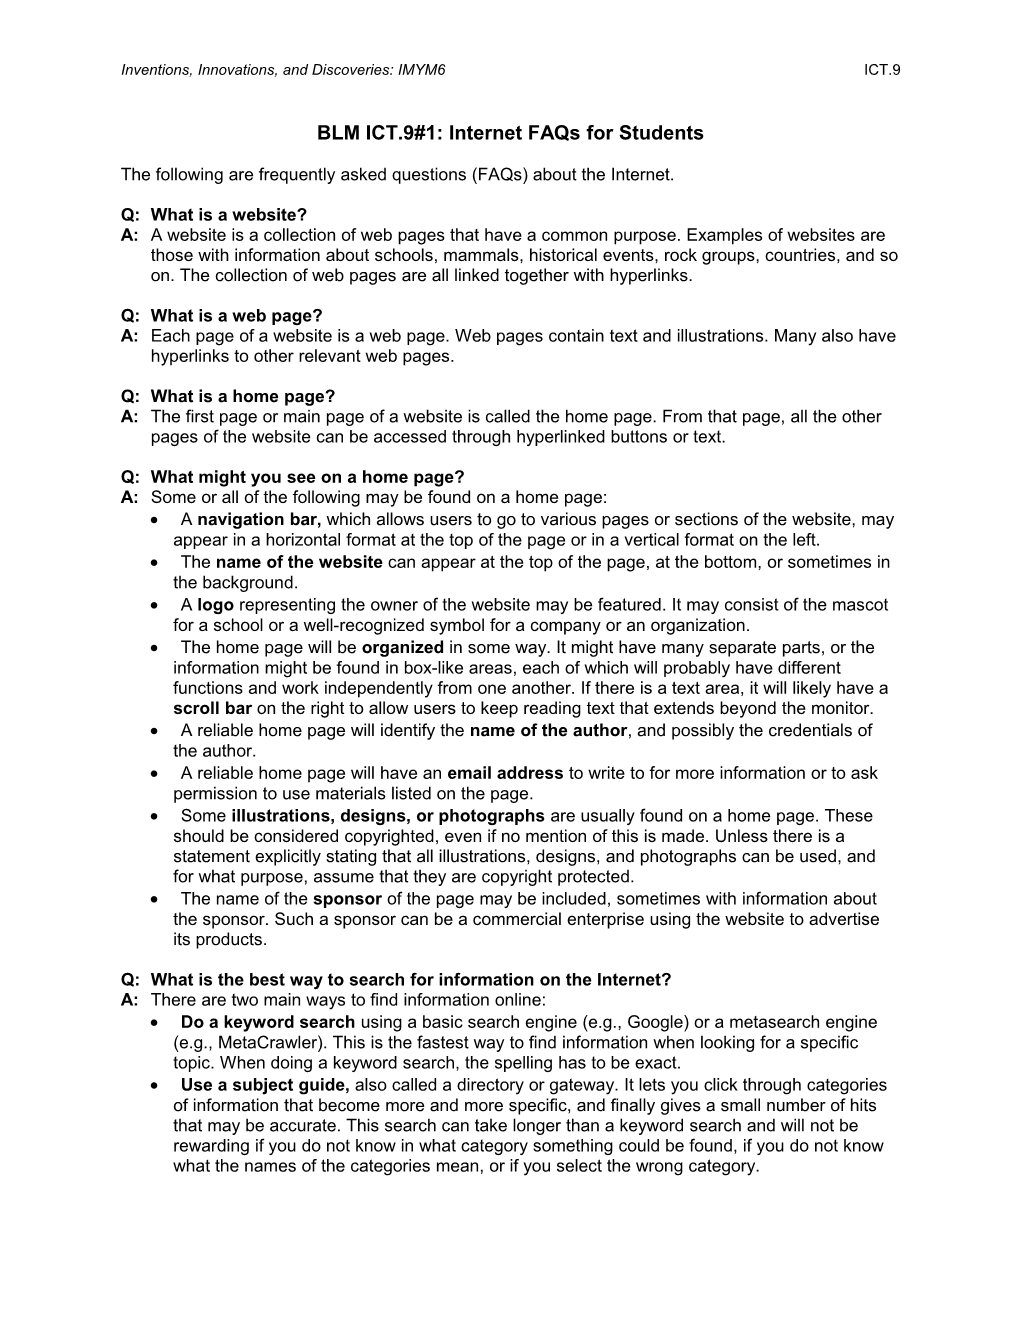 BLM ICT.9#1: Internet Faqs for Students